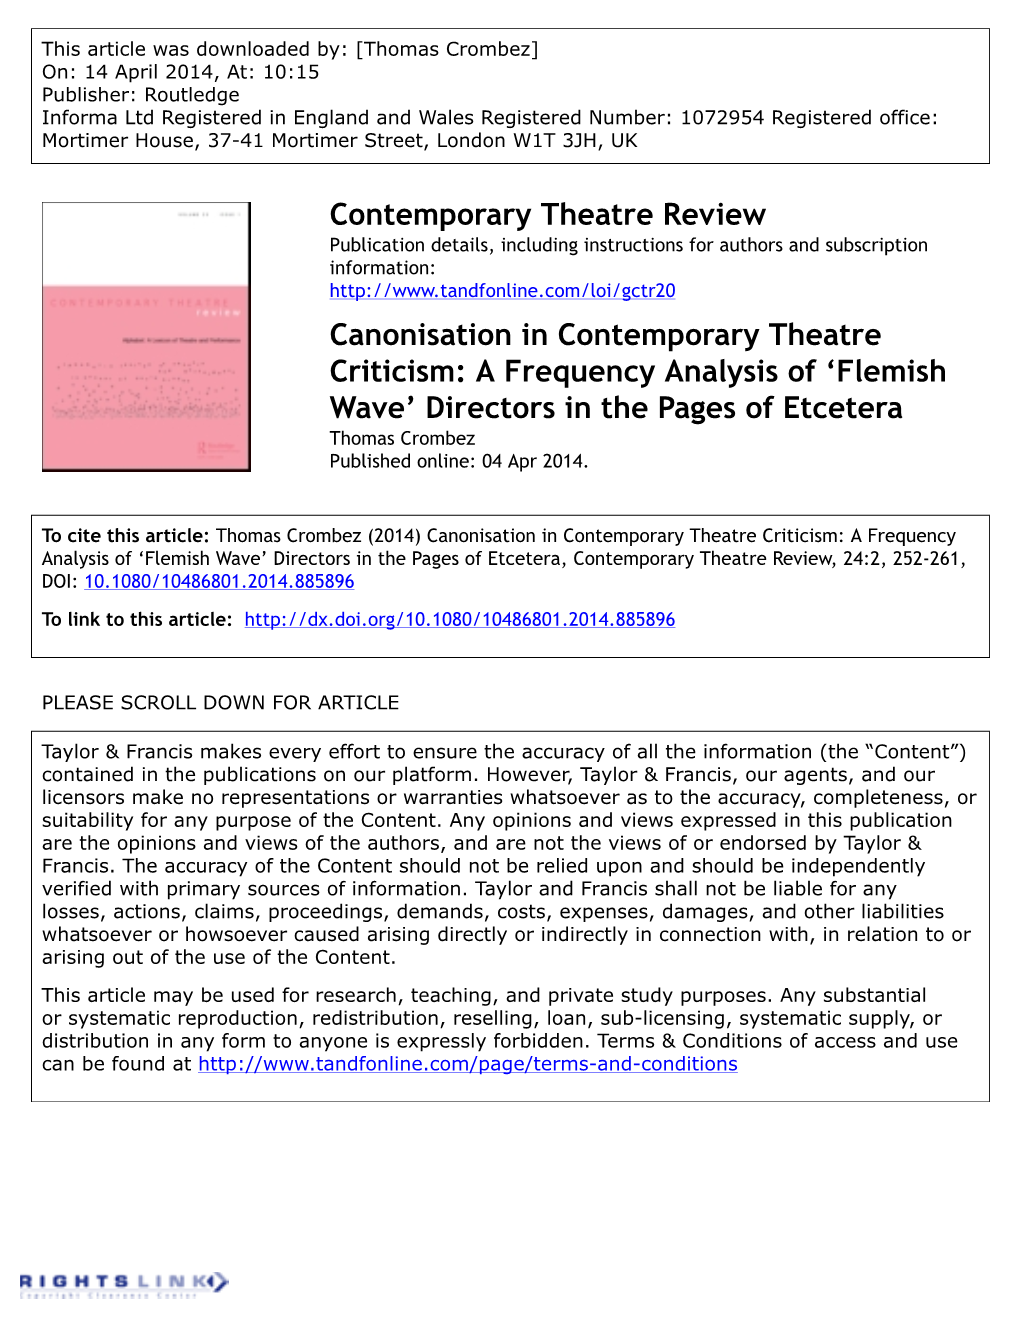 Canonisation in Contemporary Theatre Criticism: a Frequency Analysis of ‘Flemish Wave’ Directors in the Pages of Etcetera Thomas Crombez Published Online: 04 Apr 2014